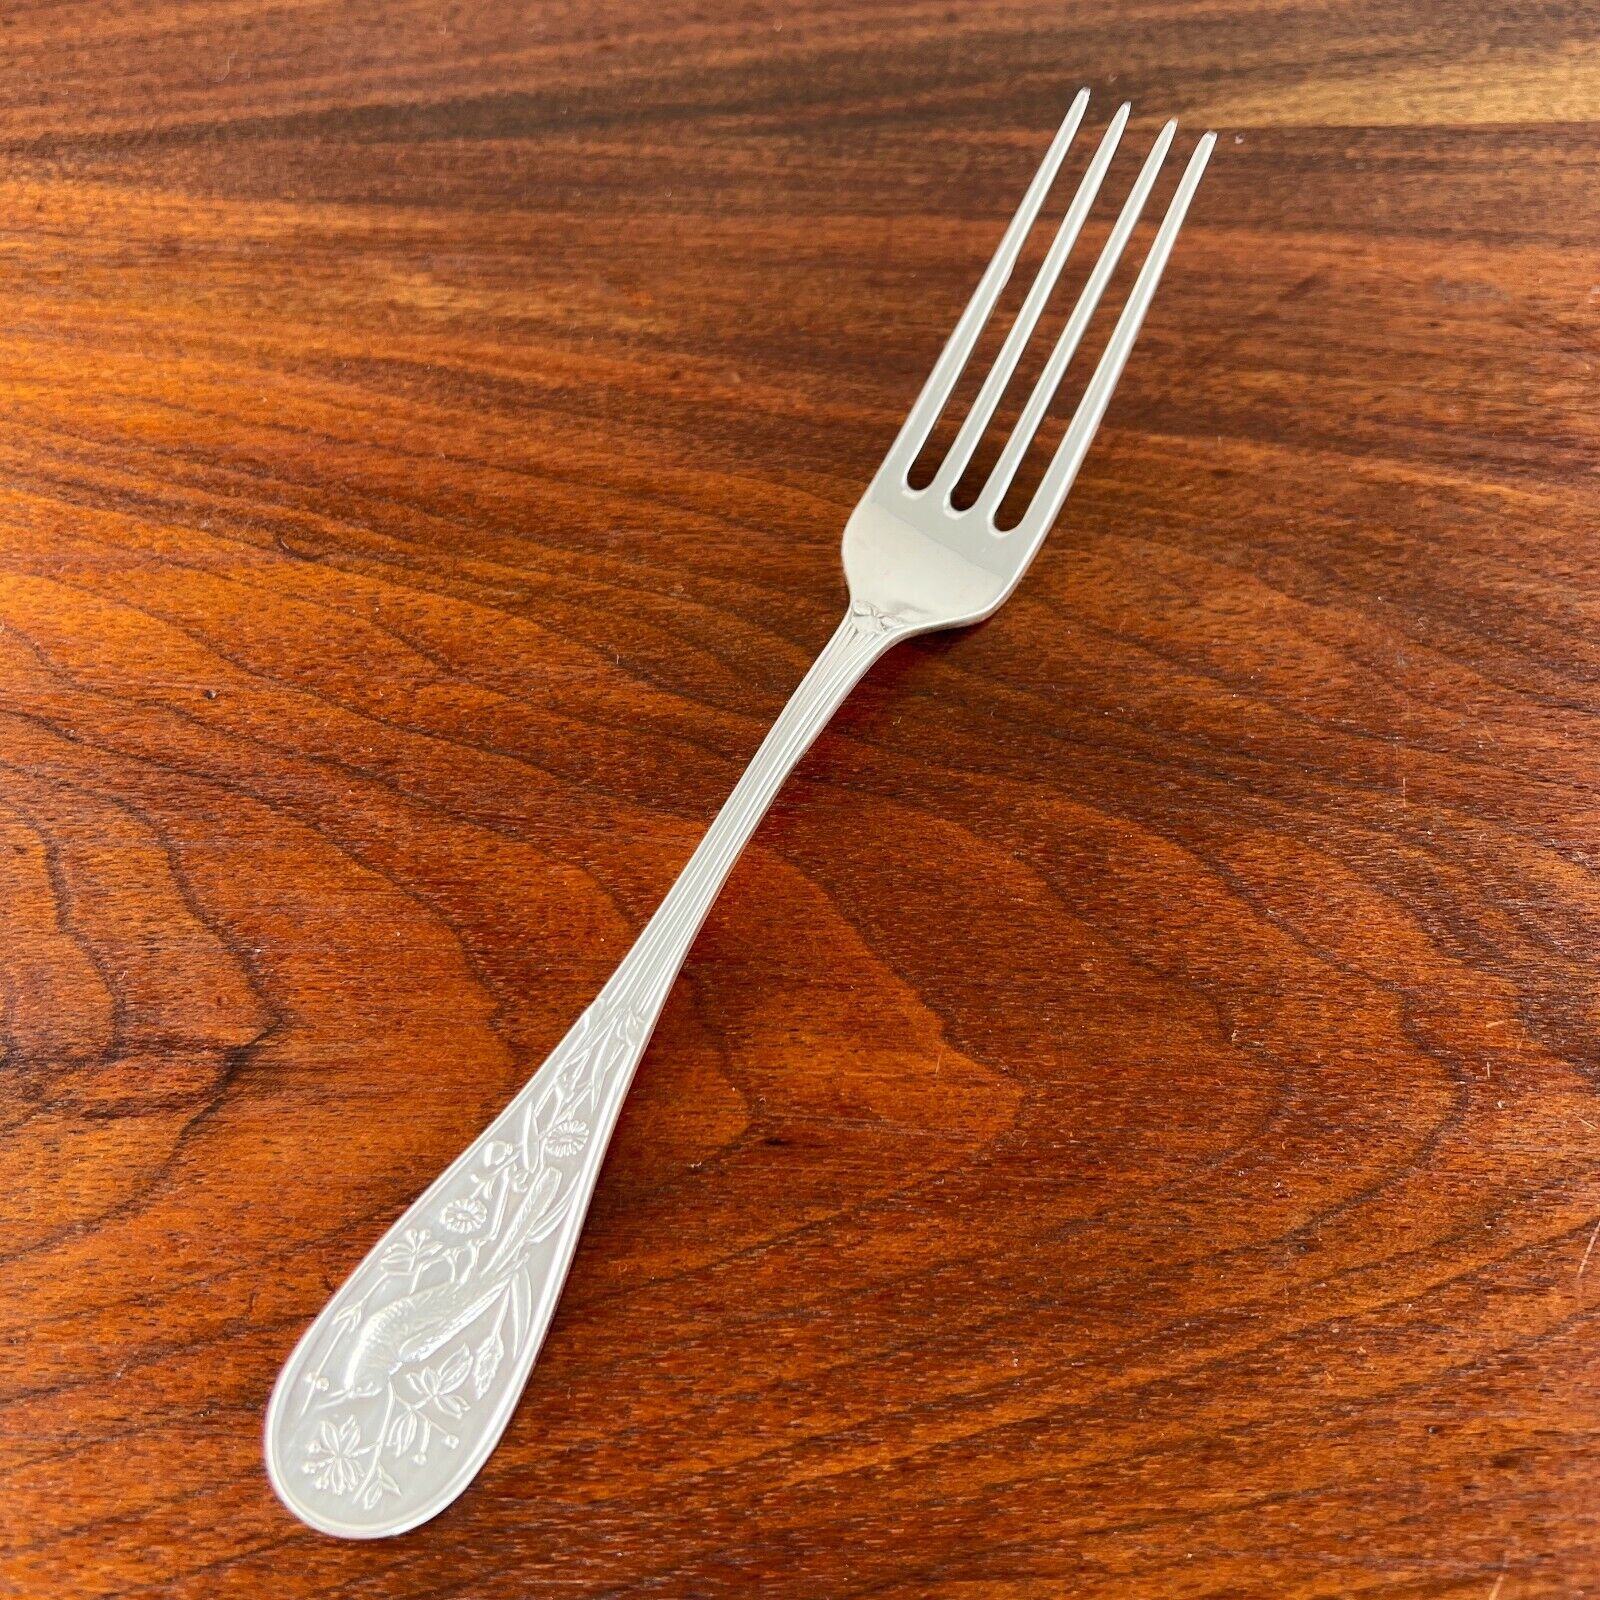 Antique Valuations: TIFFANY & CO AMERICAN AESTHETIC STERLING SILVER DINNER FORK JAPANESE 1871